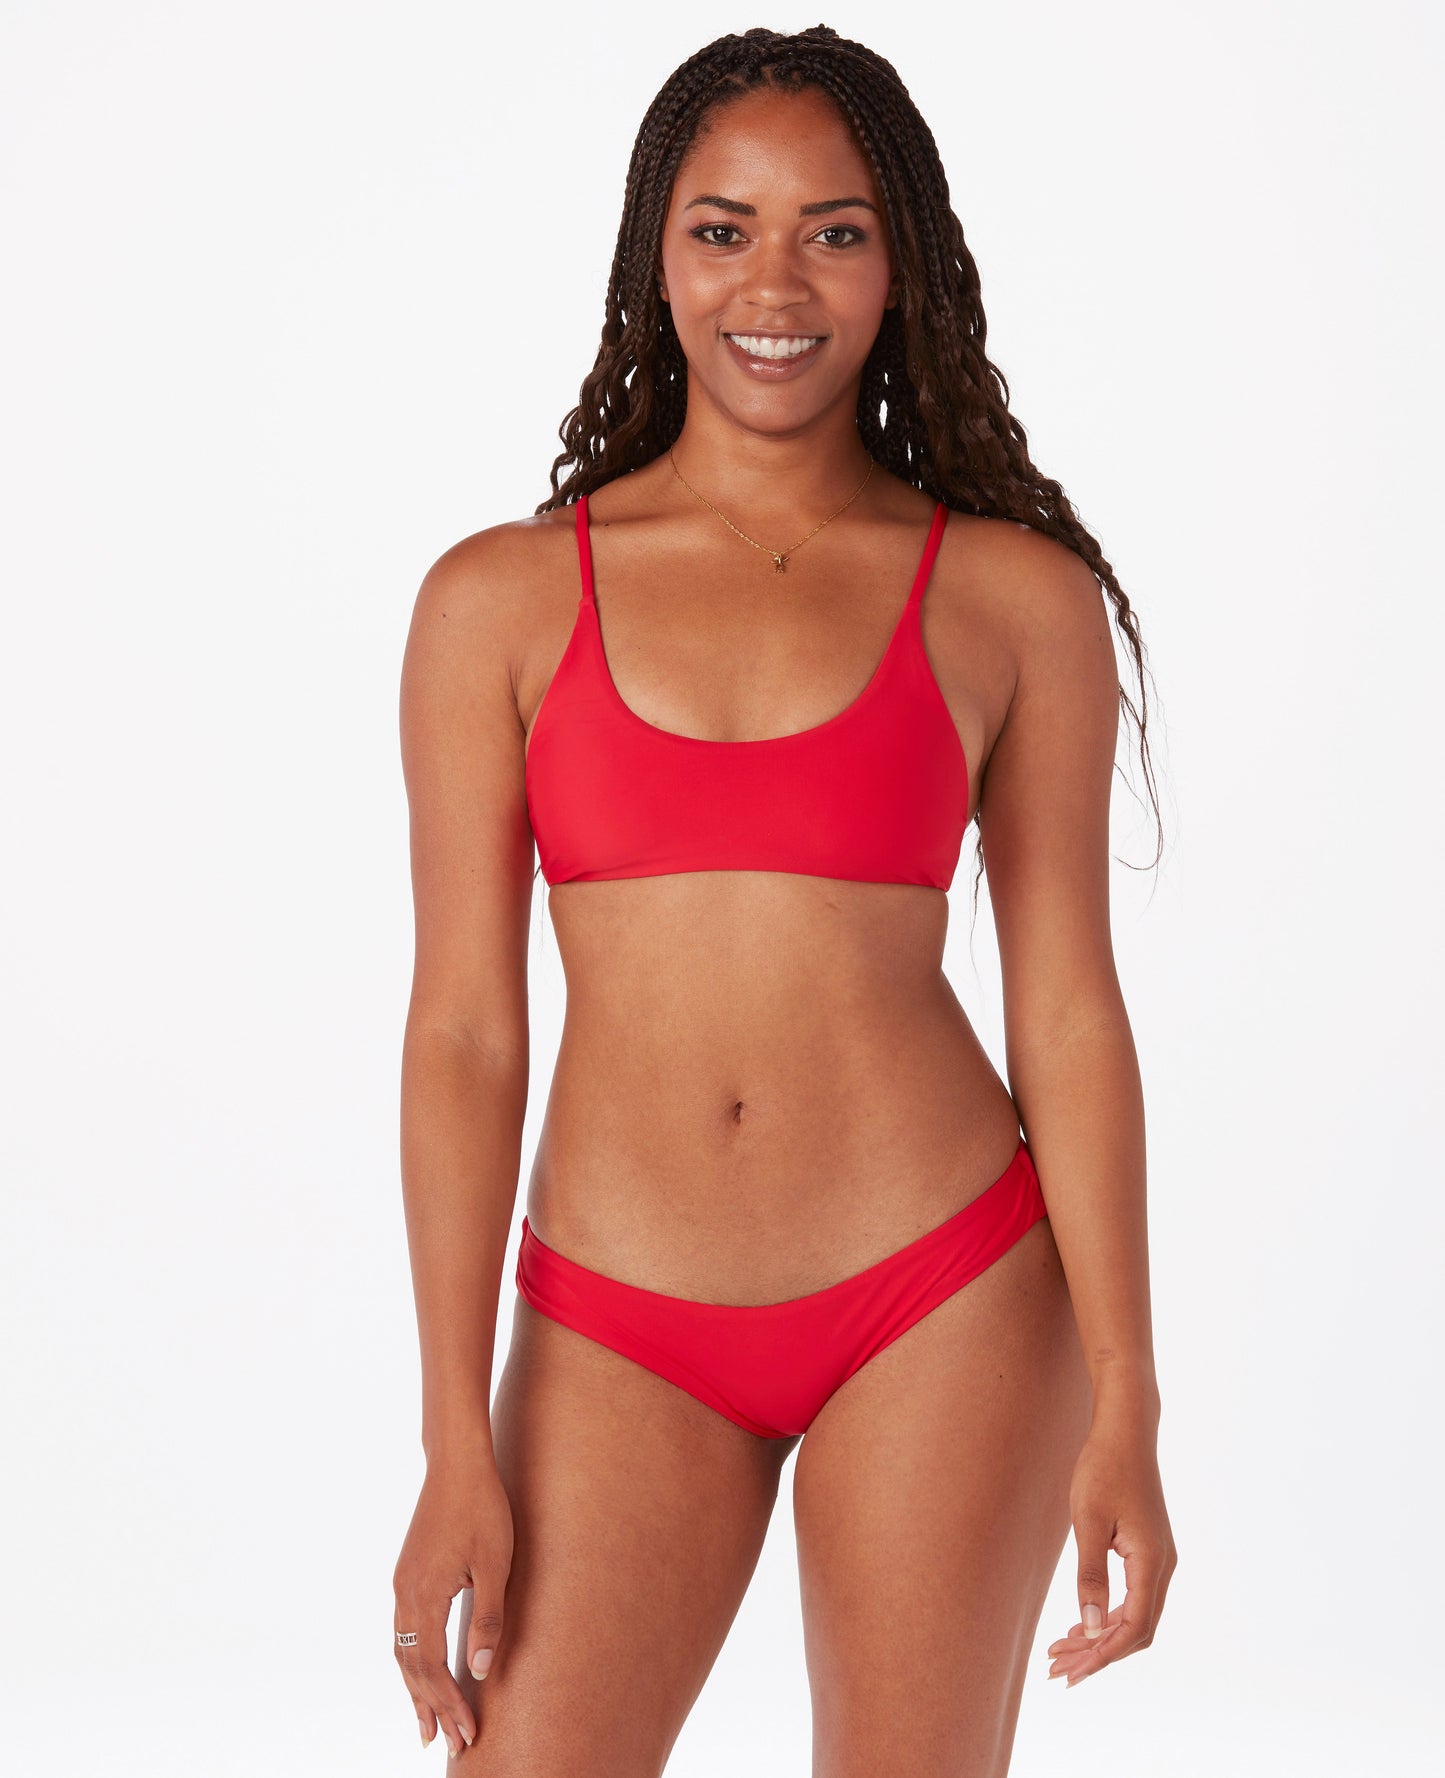 Woman in bright red bikini top against white background.